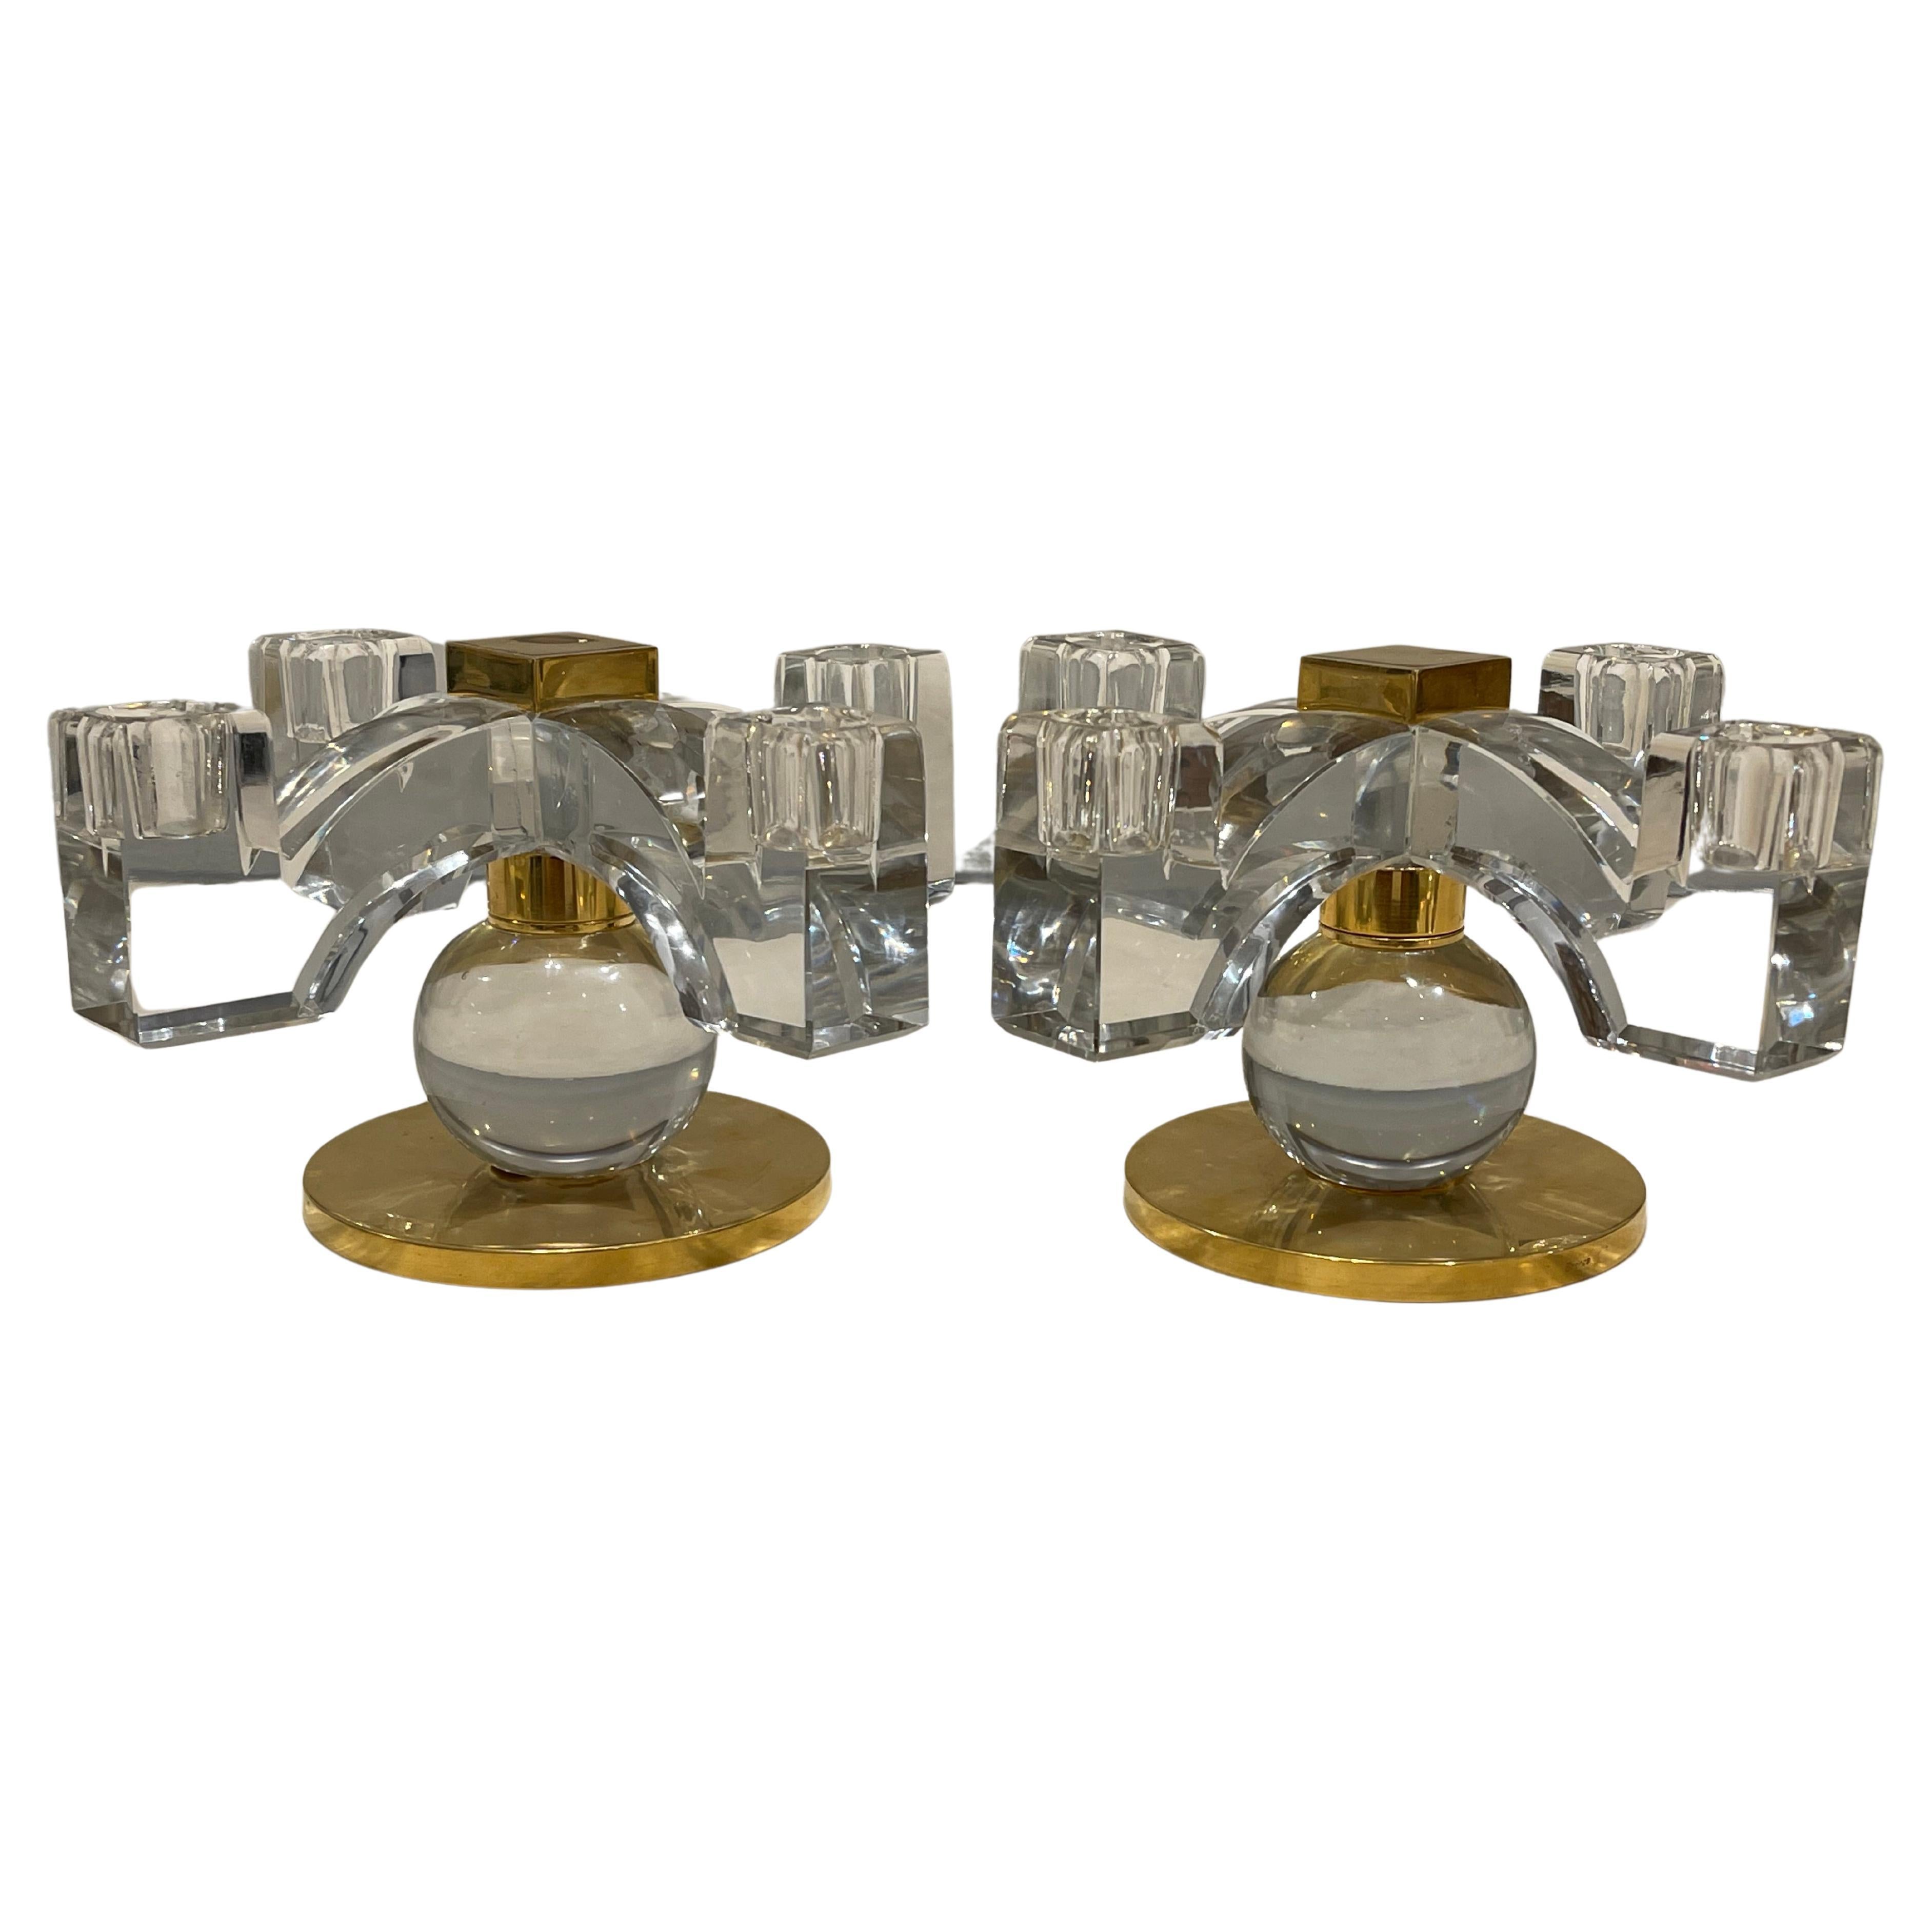 Fabulous pair of Baccarat crystal candelabras, by Jacques Adnet, France, 1935